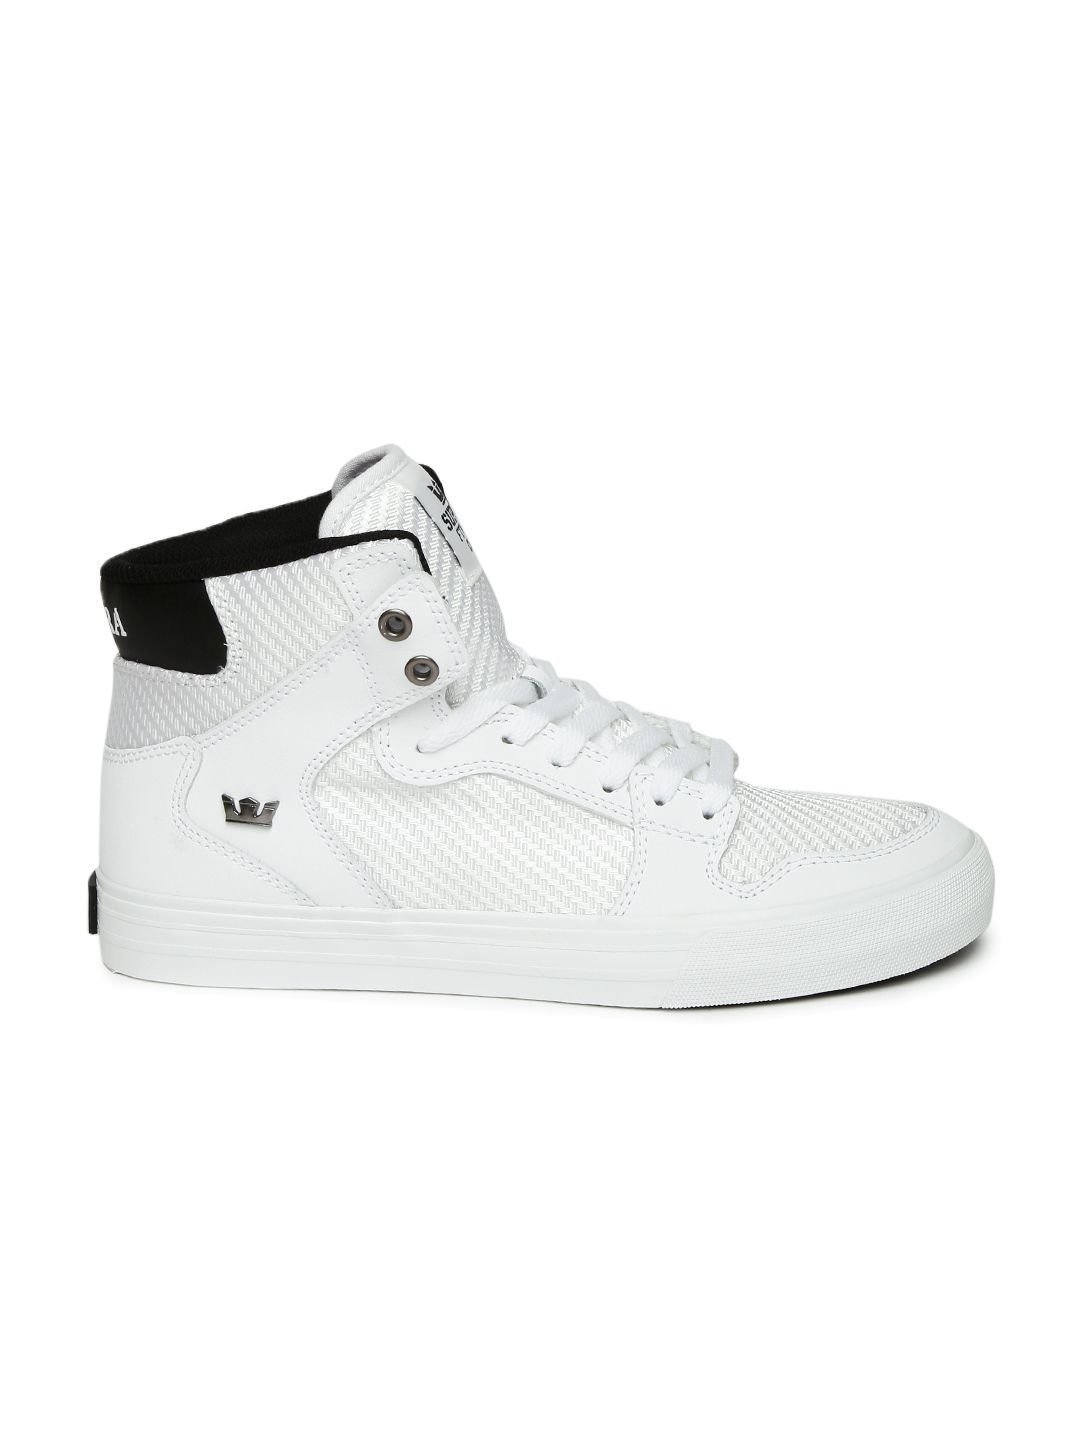 Supra White Casual Shoes - Buy Supra White Casual Shoes Online at Best ...